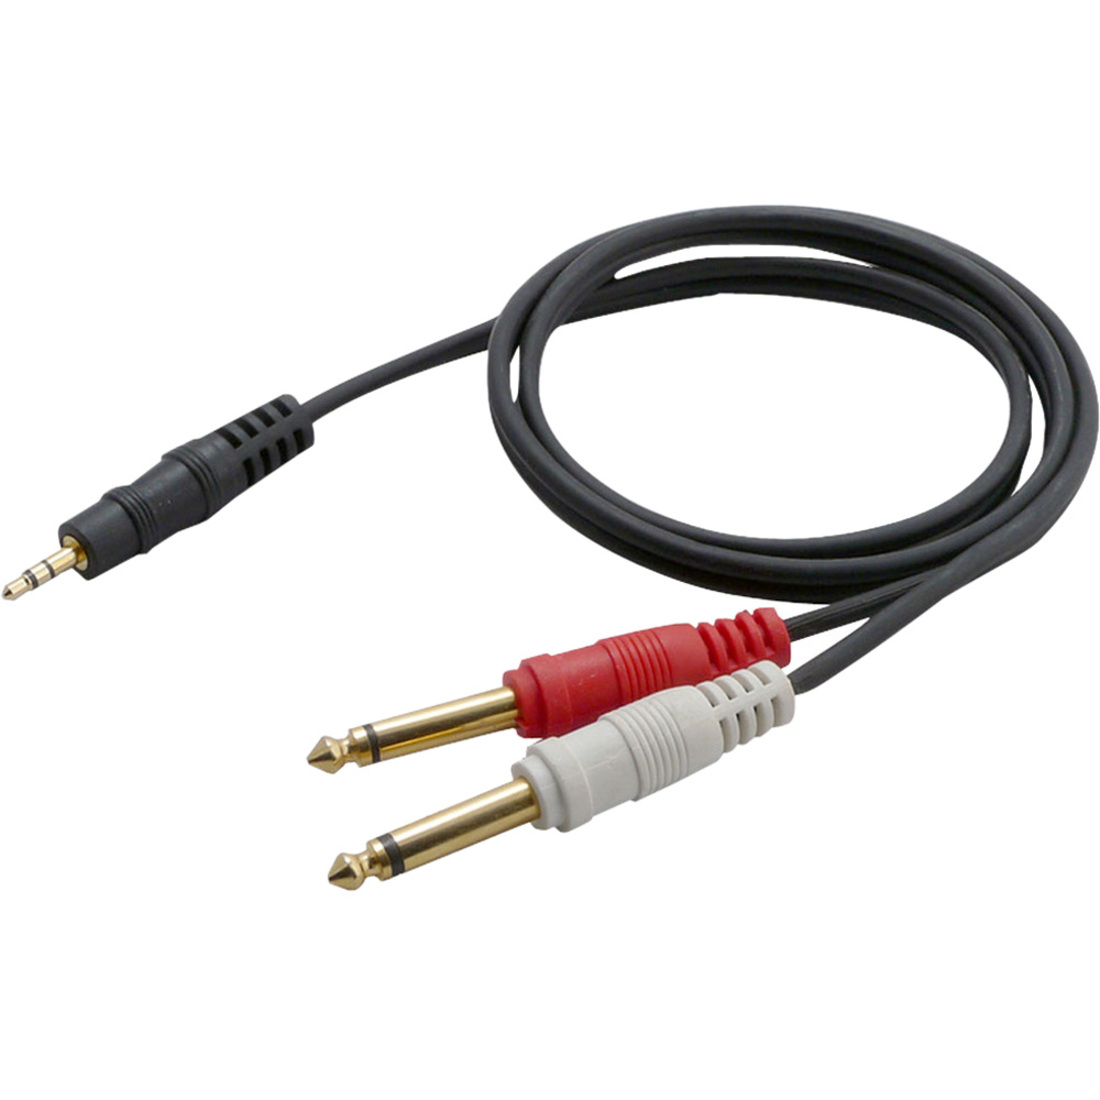 Pyle-Pro PCBL43FT3 12 Gauge 3 Feet 3.5mm Male Stereo to Dual 1/4-Inch Male Mono Y-Cable Adapter - image 1 of 2